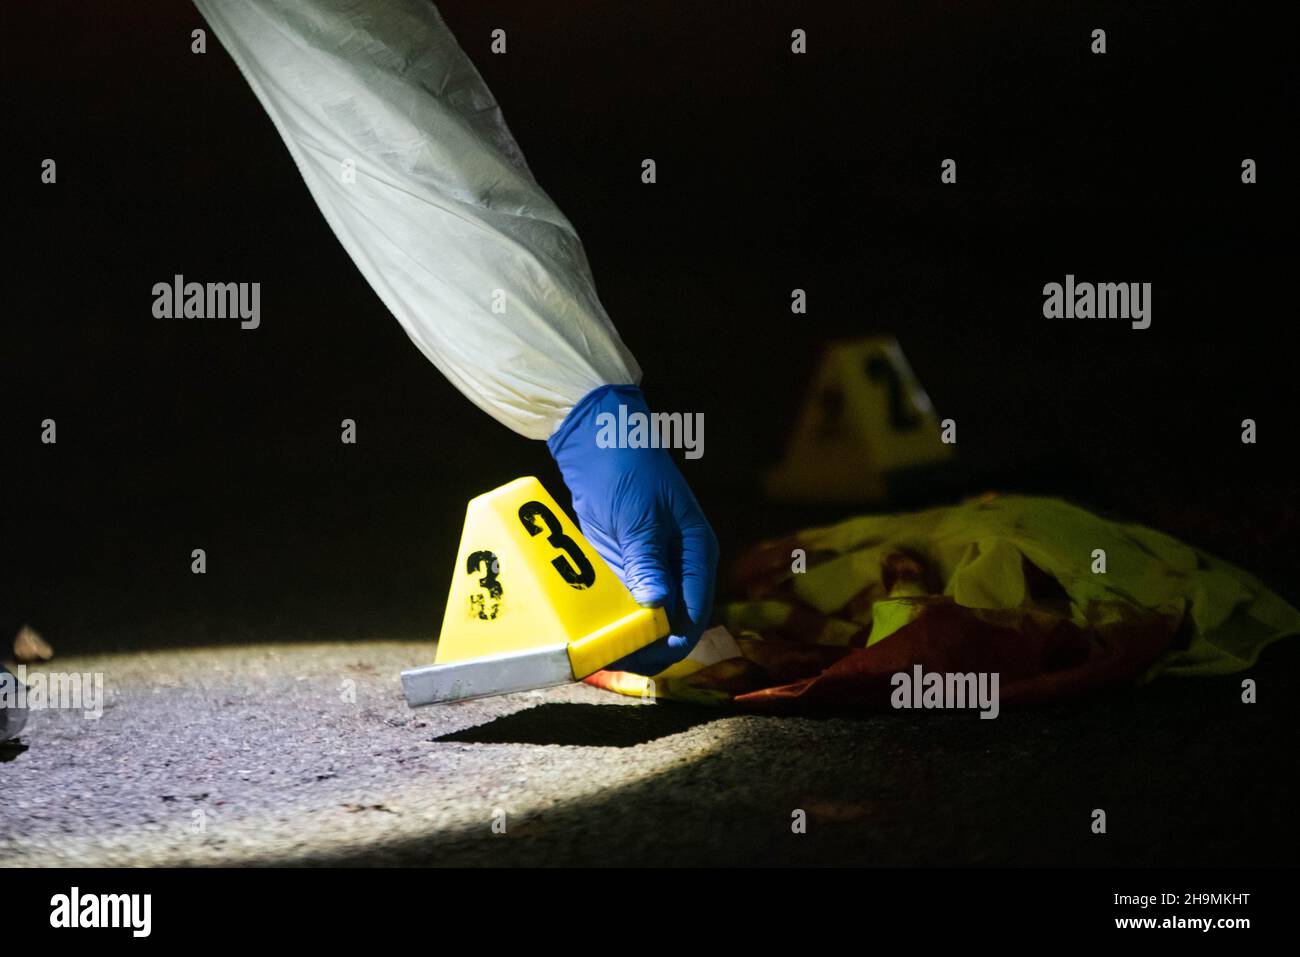 Forensics placing evidence marker number three by bloodied reflective vest, Birmingham, UK. Stock Photo